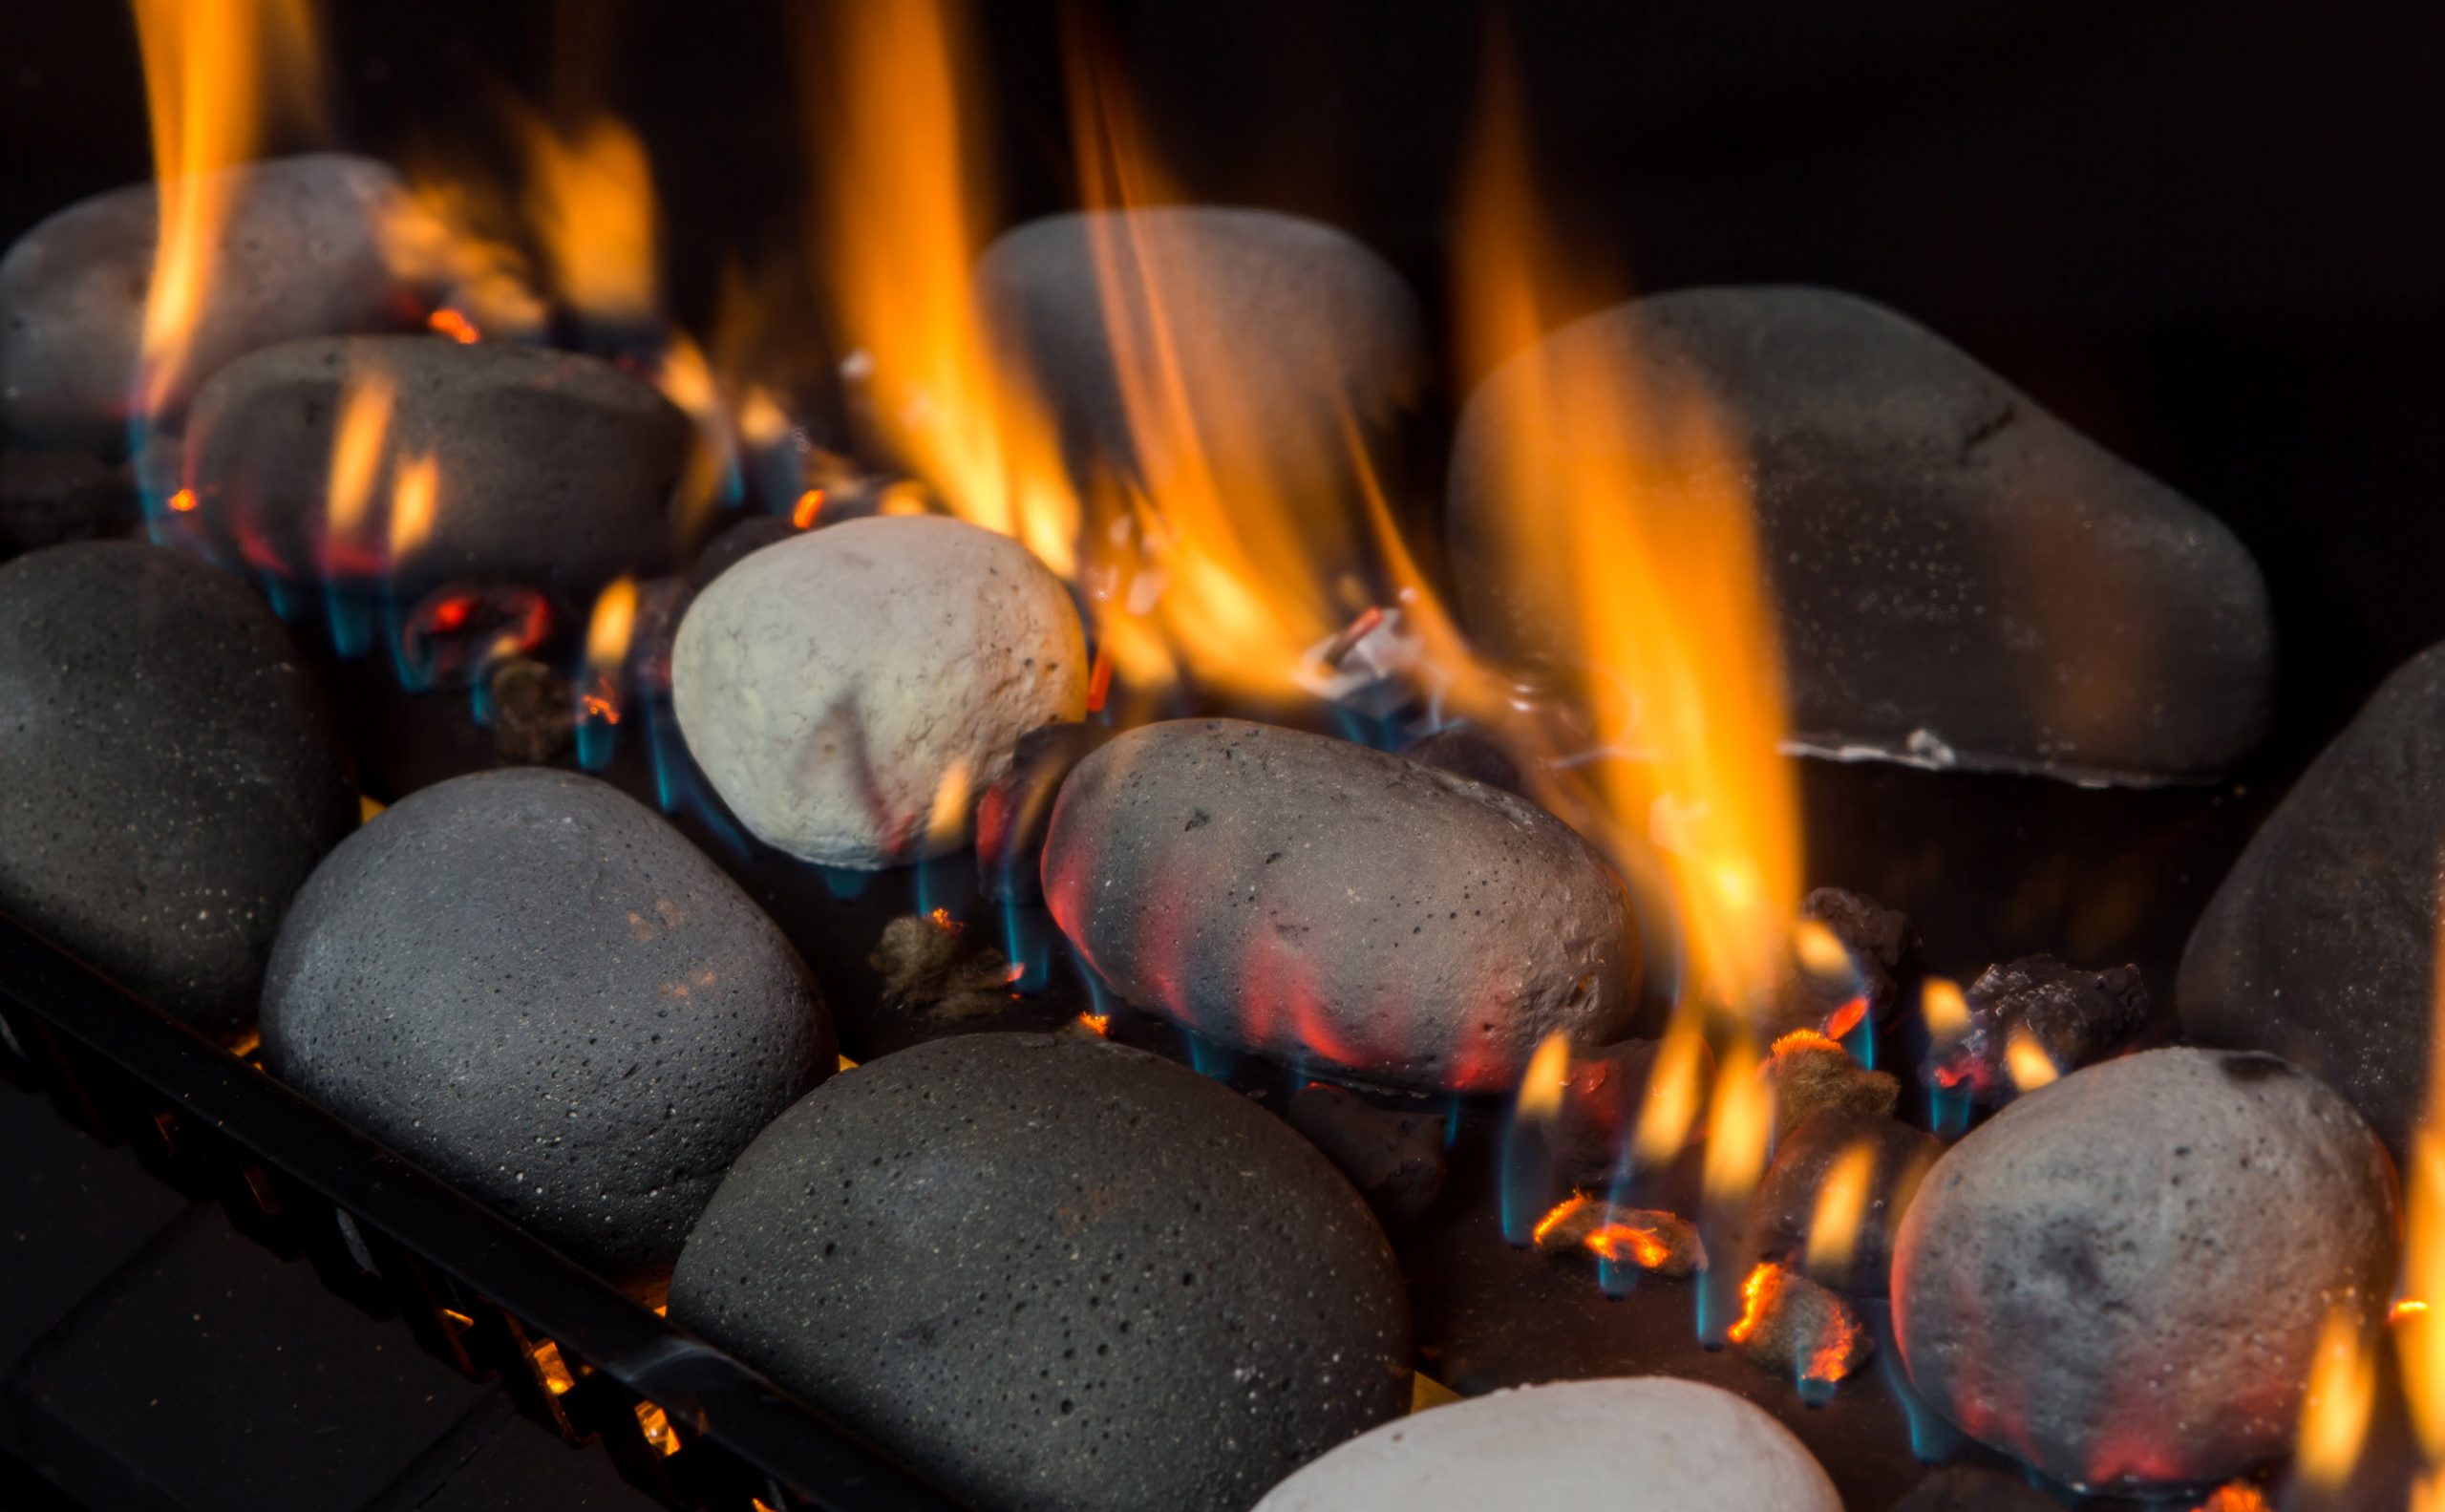 650-750-Gas-Fire-Ember-details-Pebble-Stones-Close-Up-9-scaled